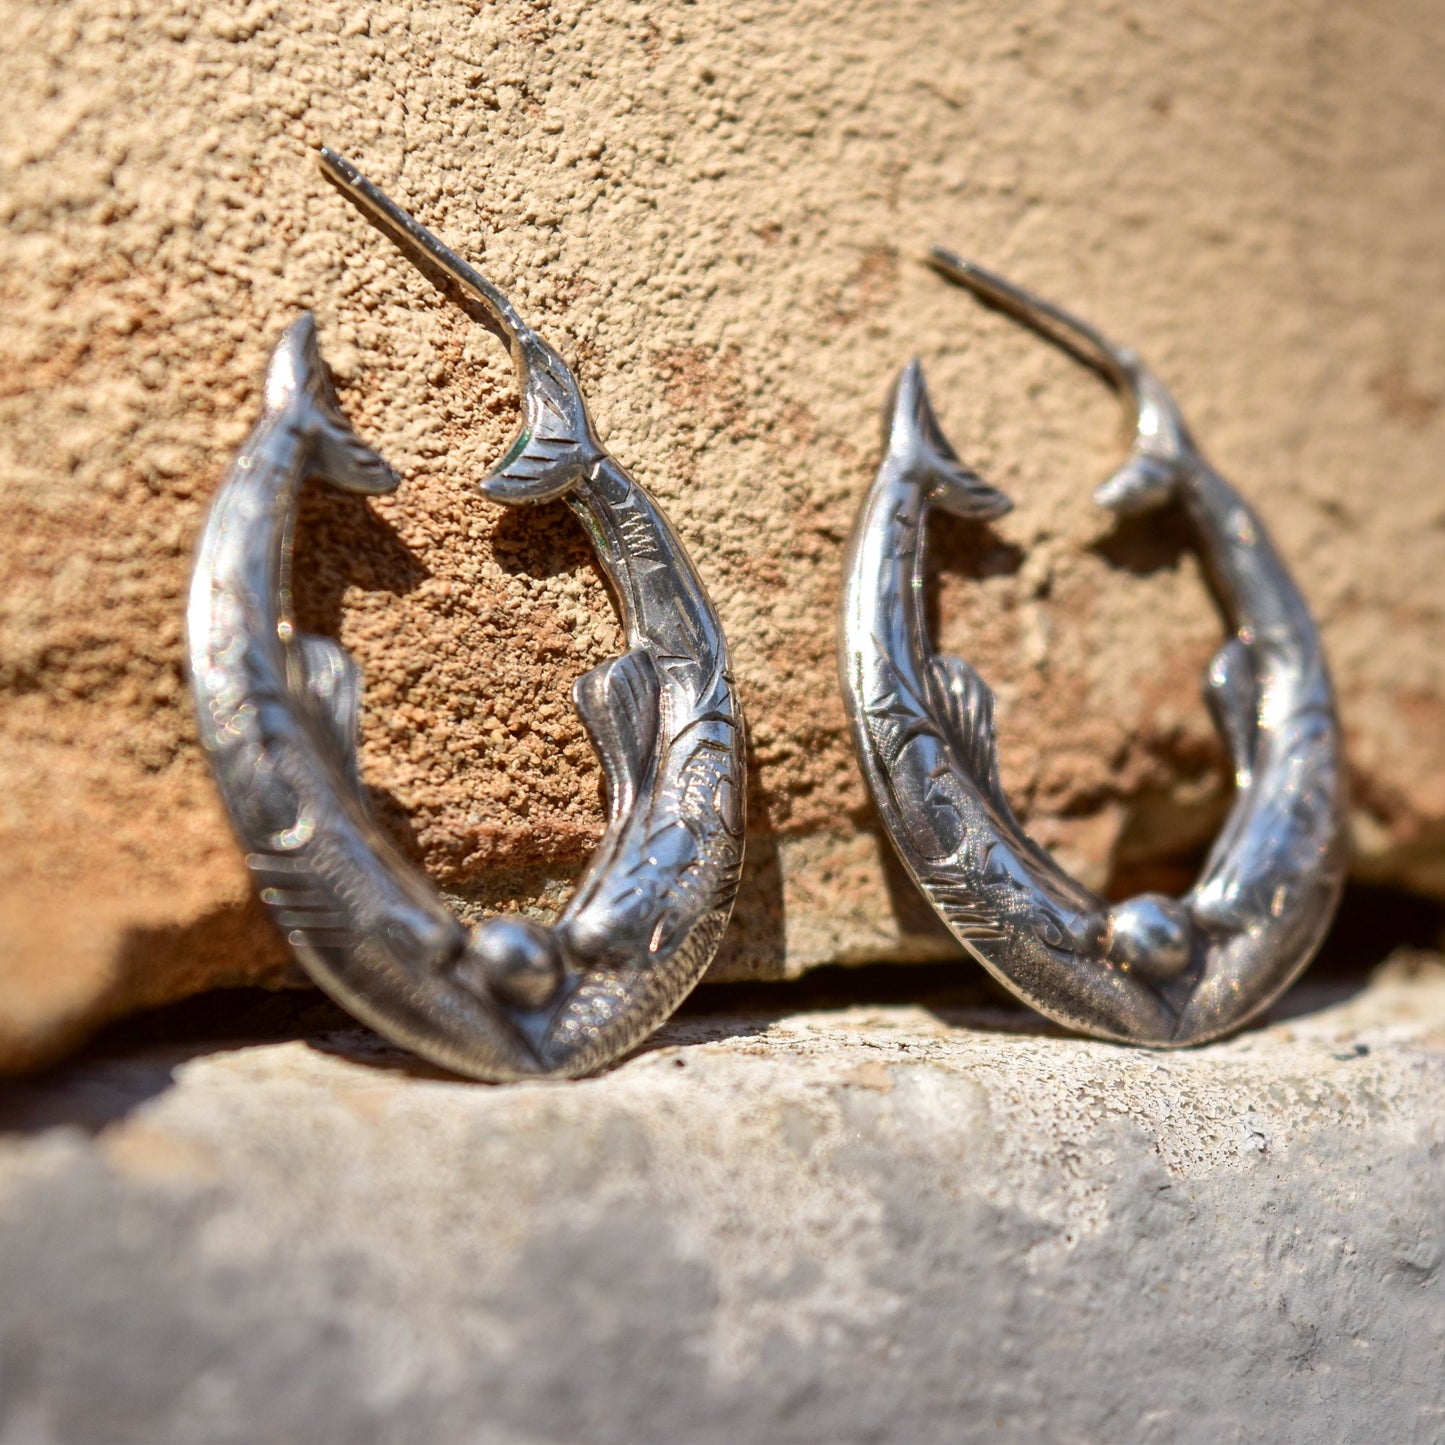 Engraved sterling silver fish hoop earrings with mirrored etched design, 30mm oval pierced hoops